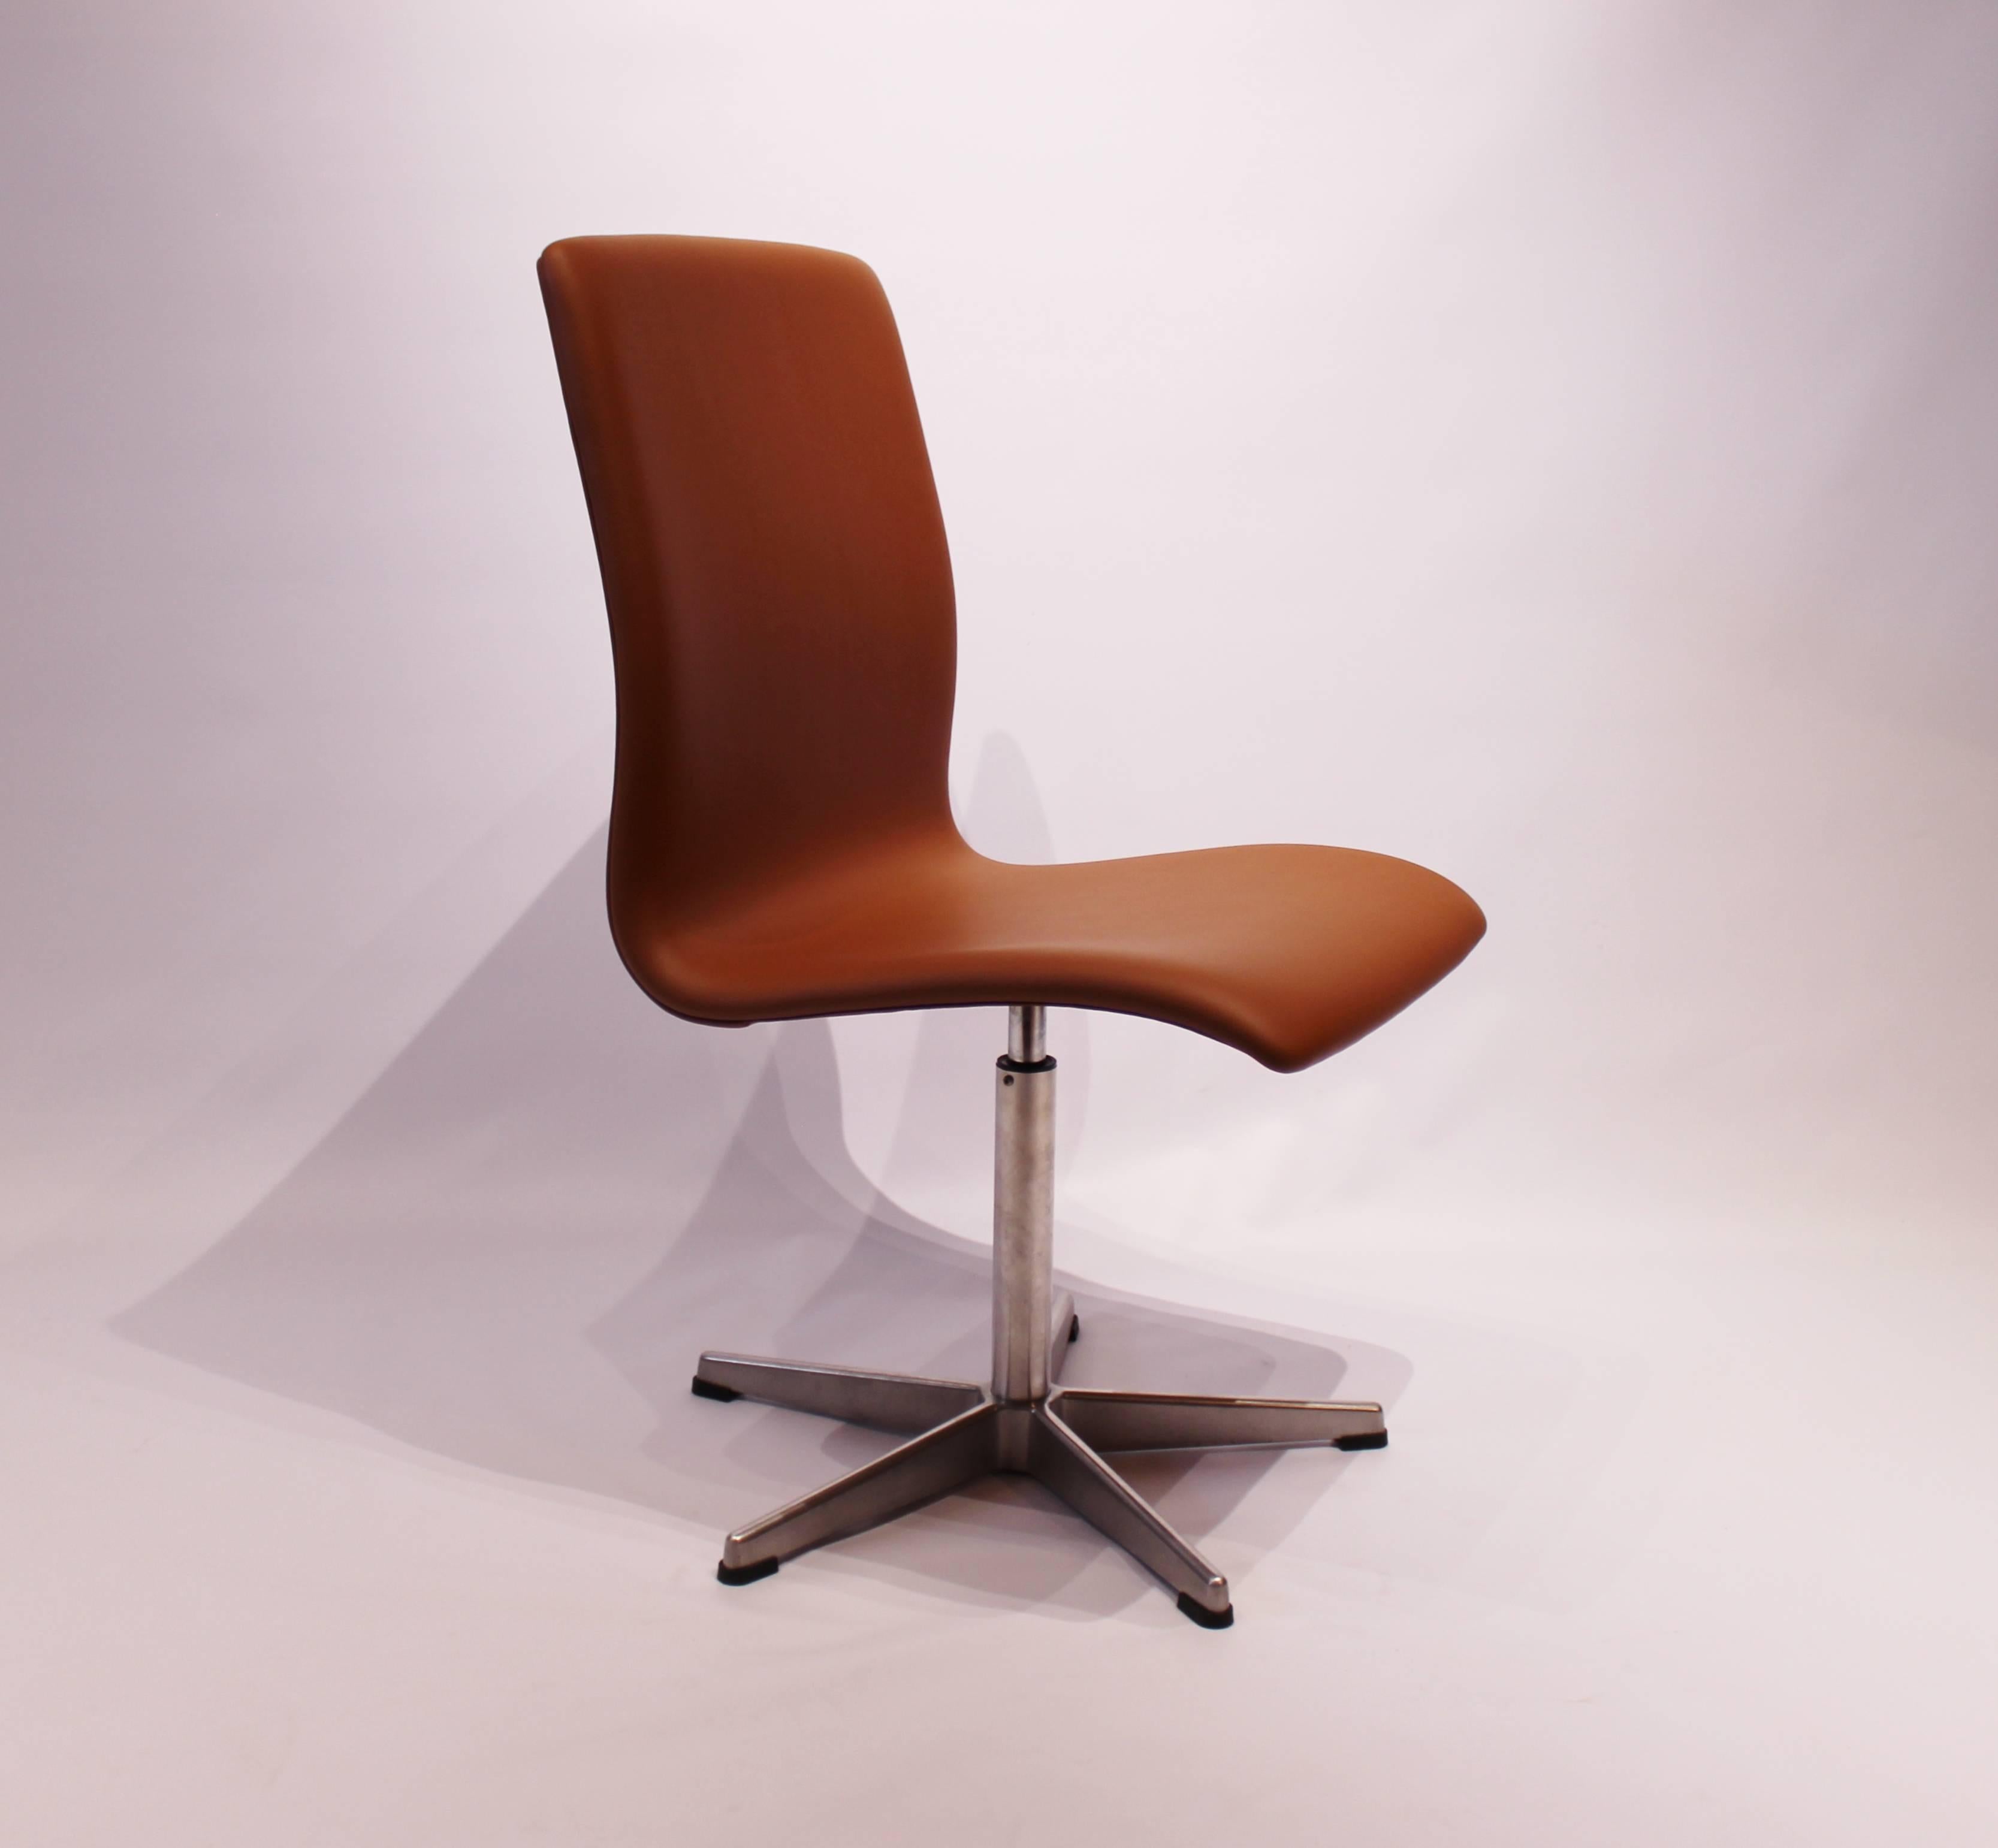 Oxford Classic office chair, model 3171, in cognac colored leather designed by Arne Jacobsen in 1963 and manufactured by Fritz Hansen in 1989. The chair is with original upholstery.